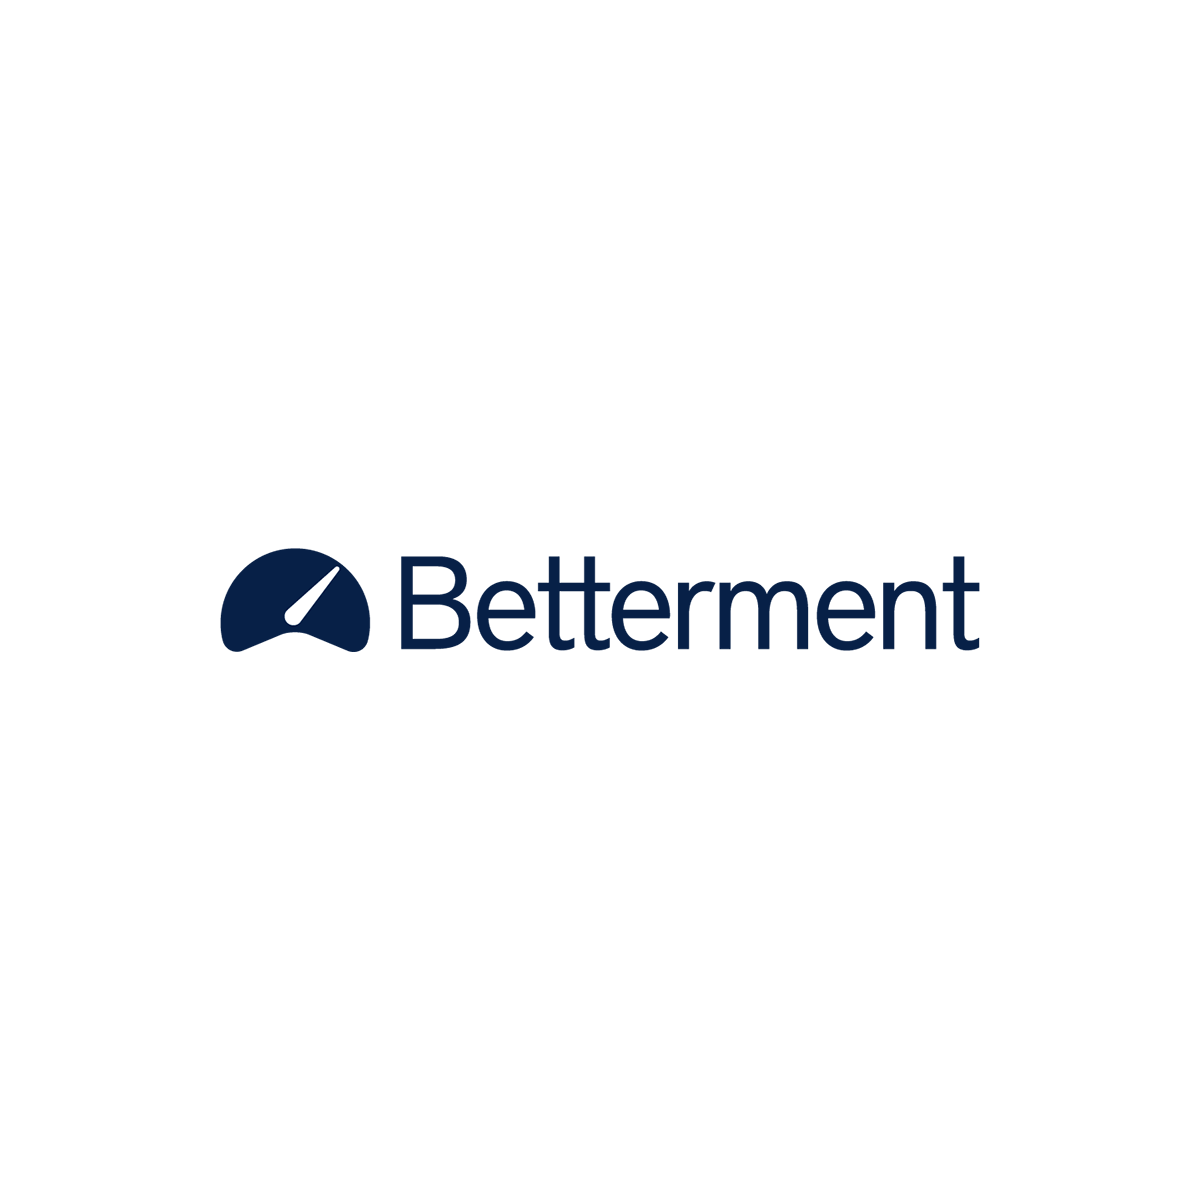 Betterment Promo Code For Free 5 Minute Investment Review